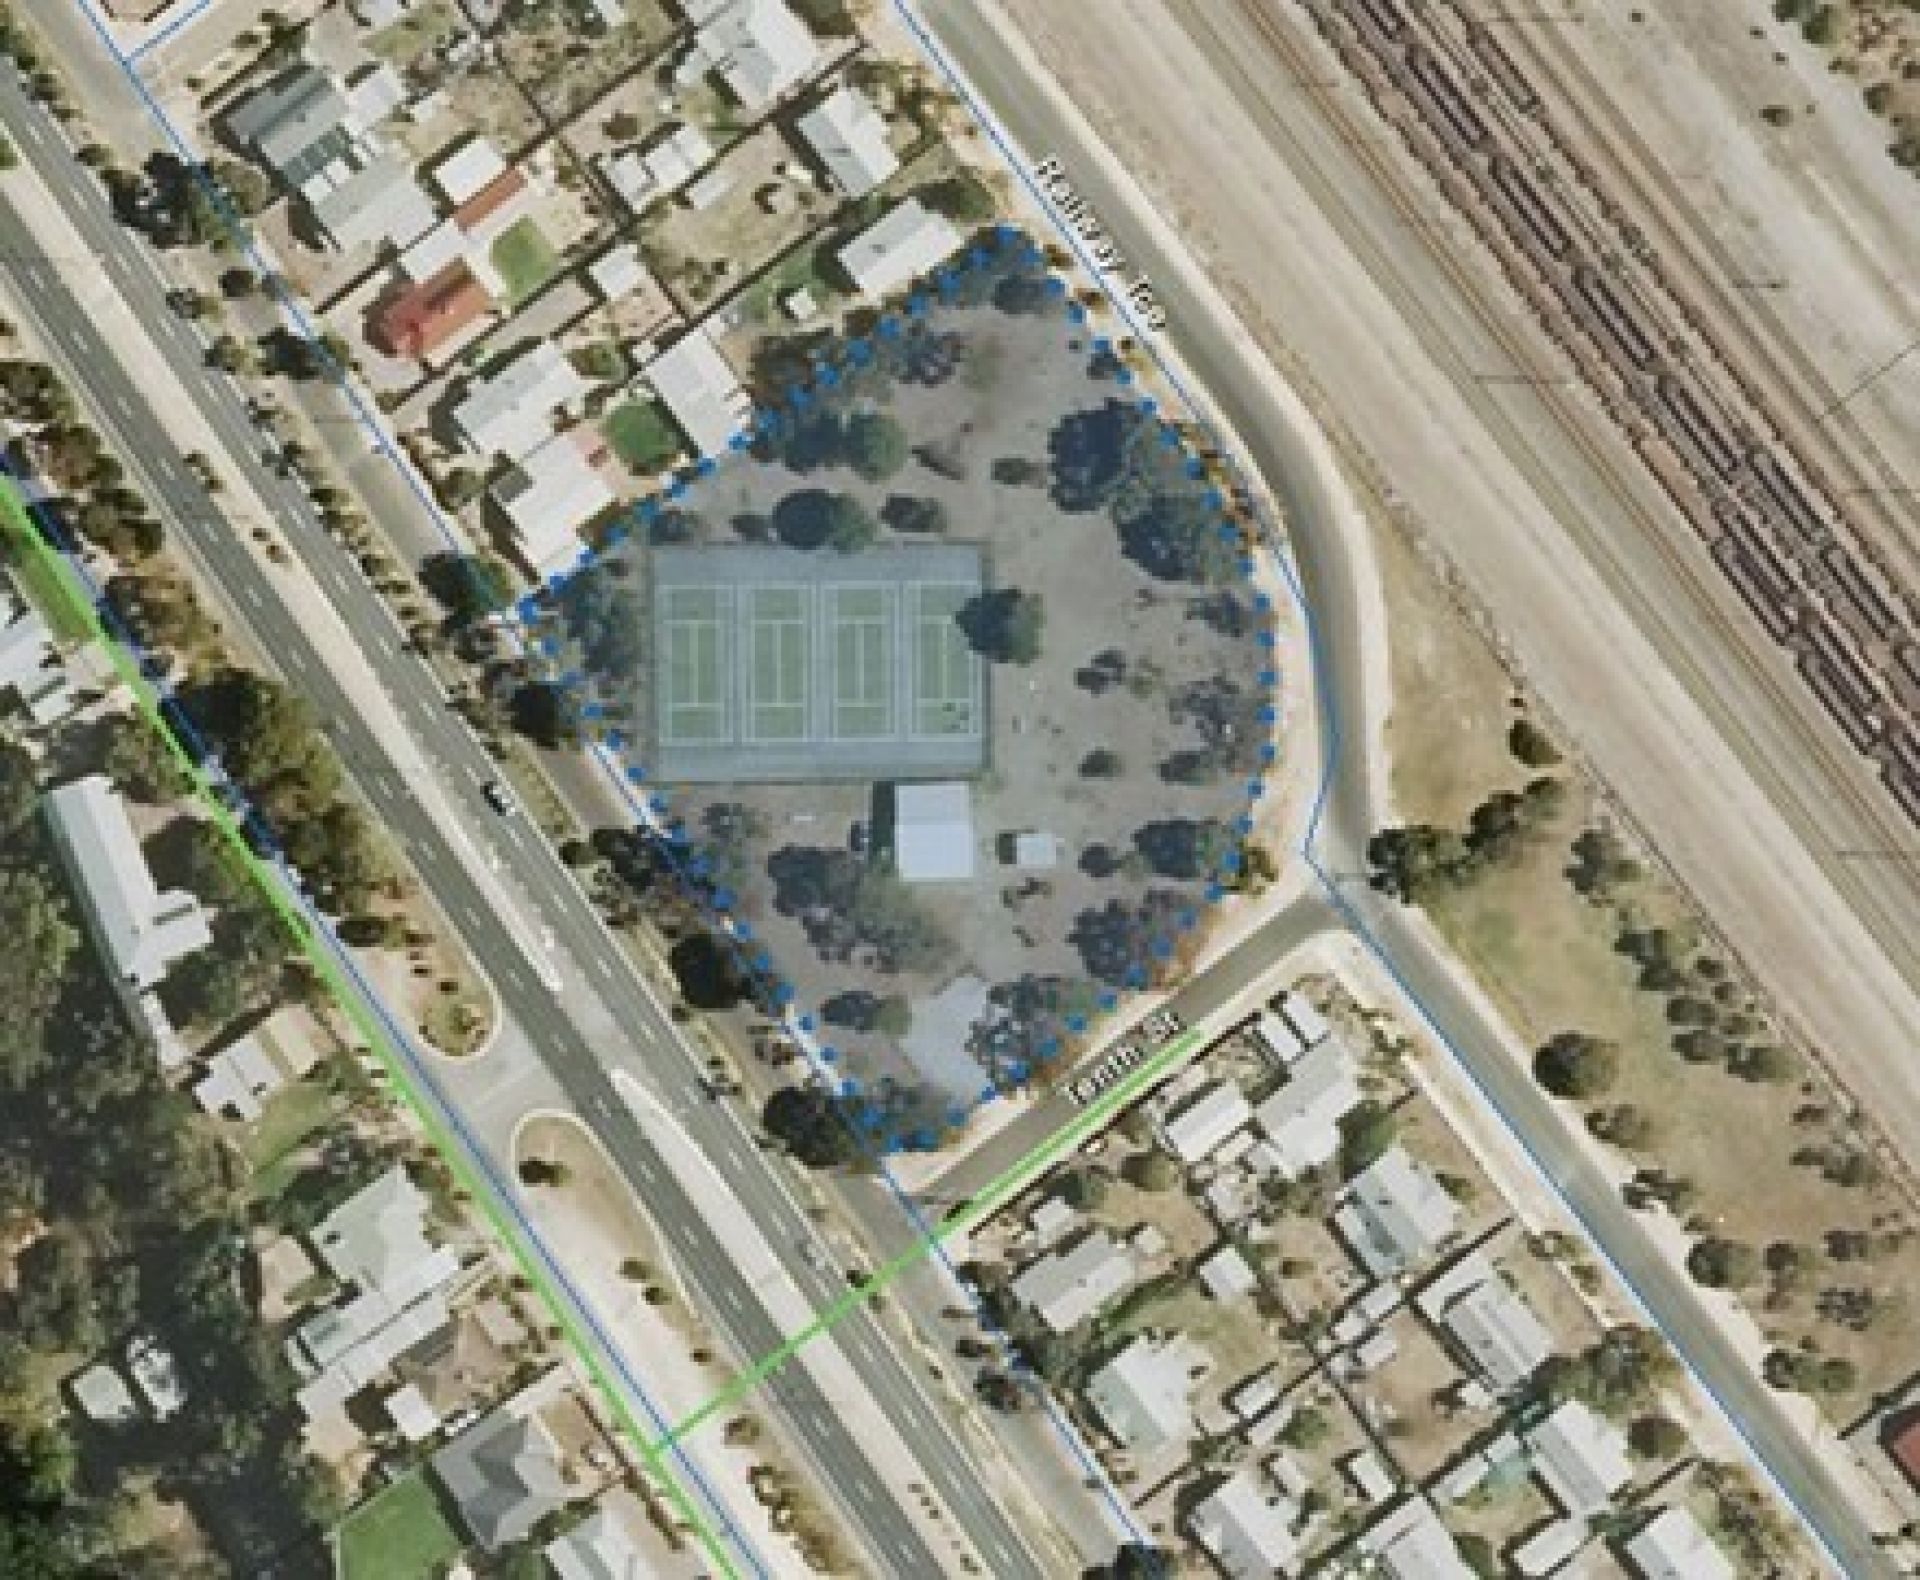 Tenth St - Aerial View of site